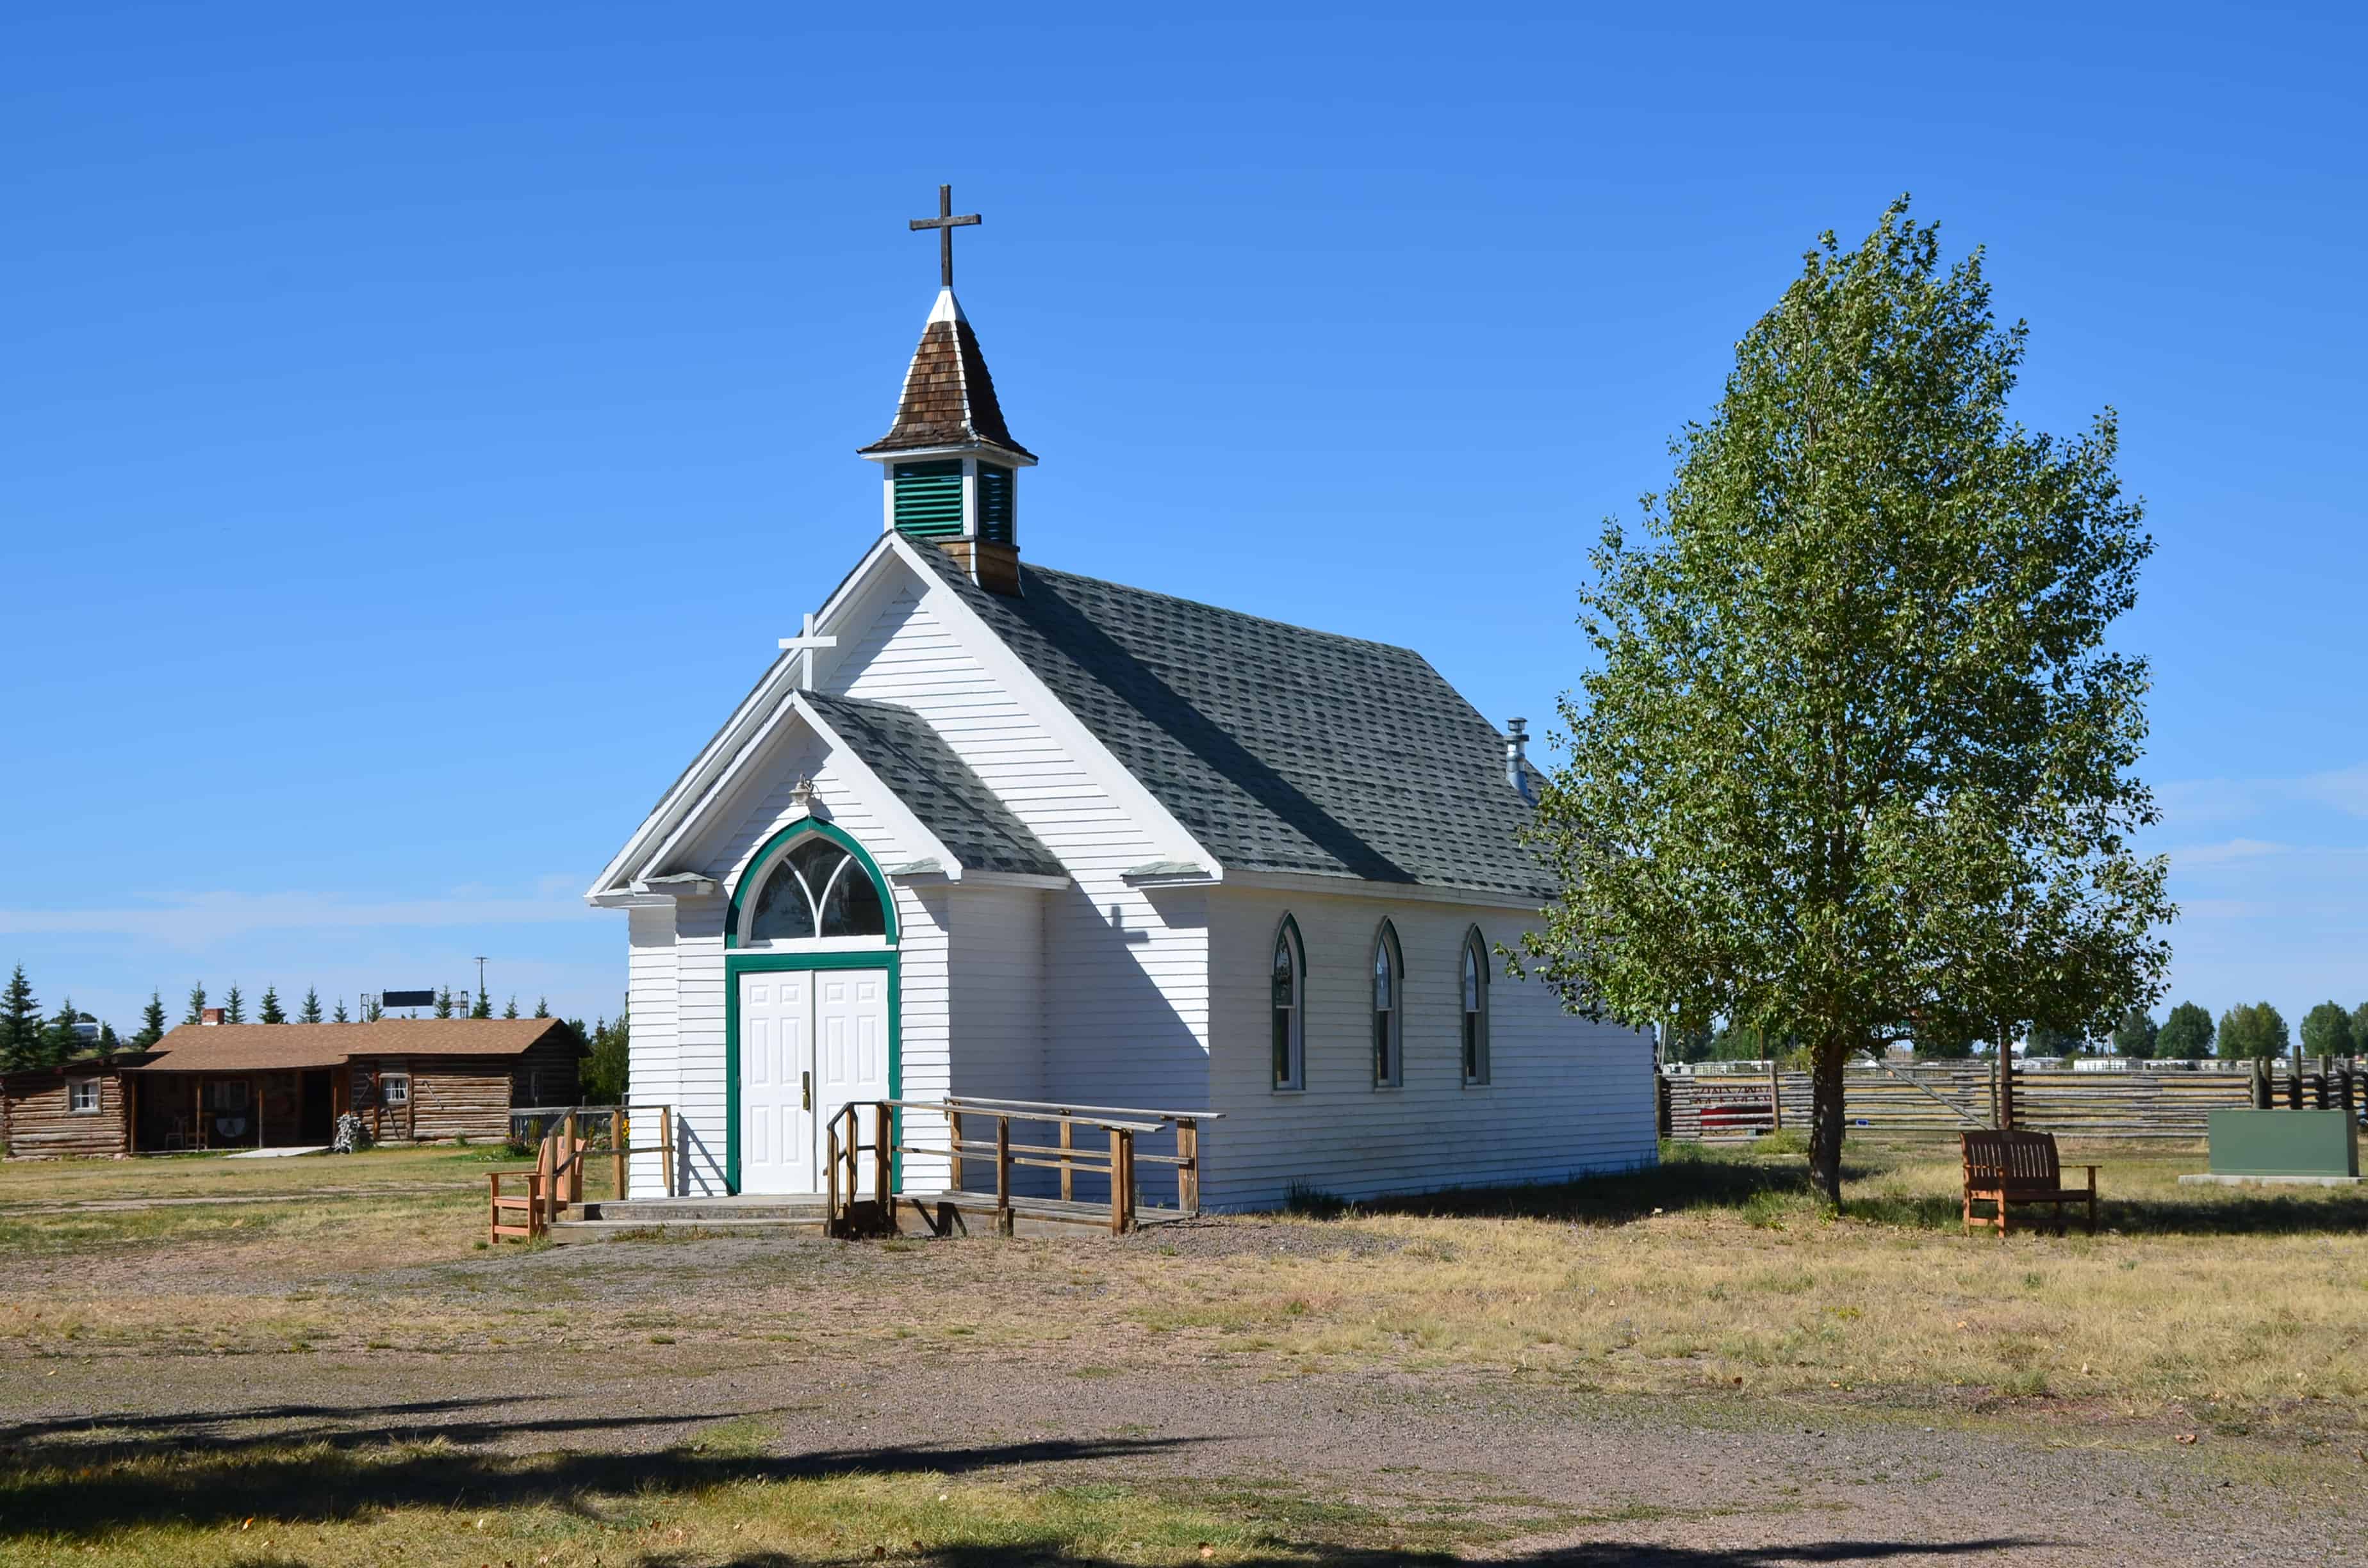 St. Mary’s of the Plains church at the pioneer village